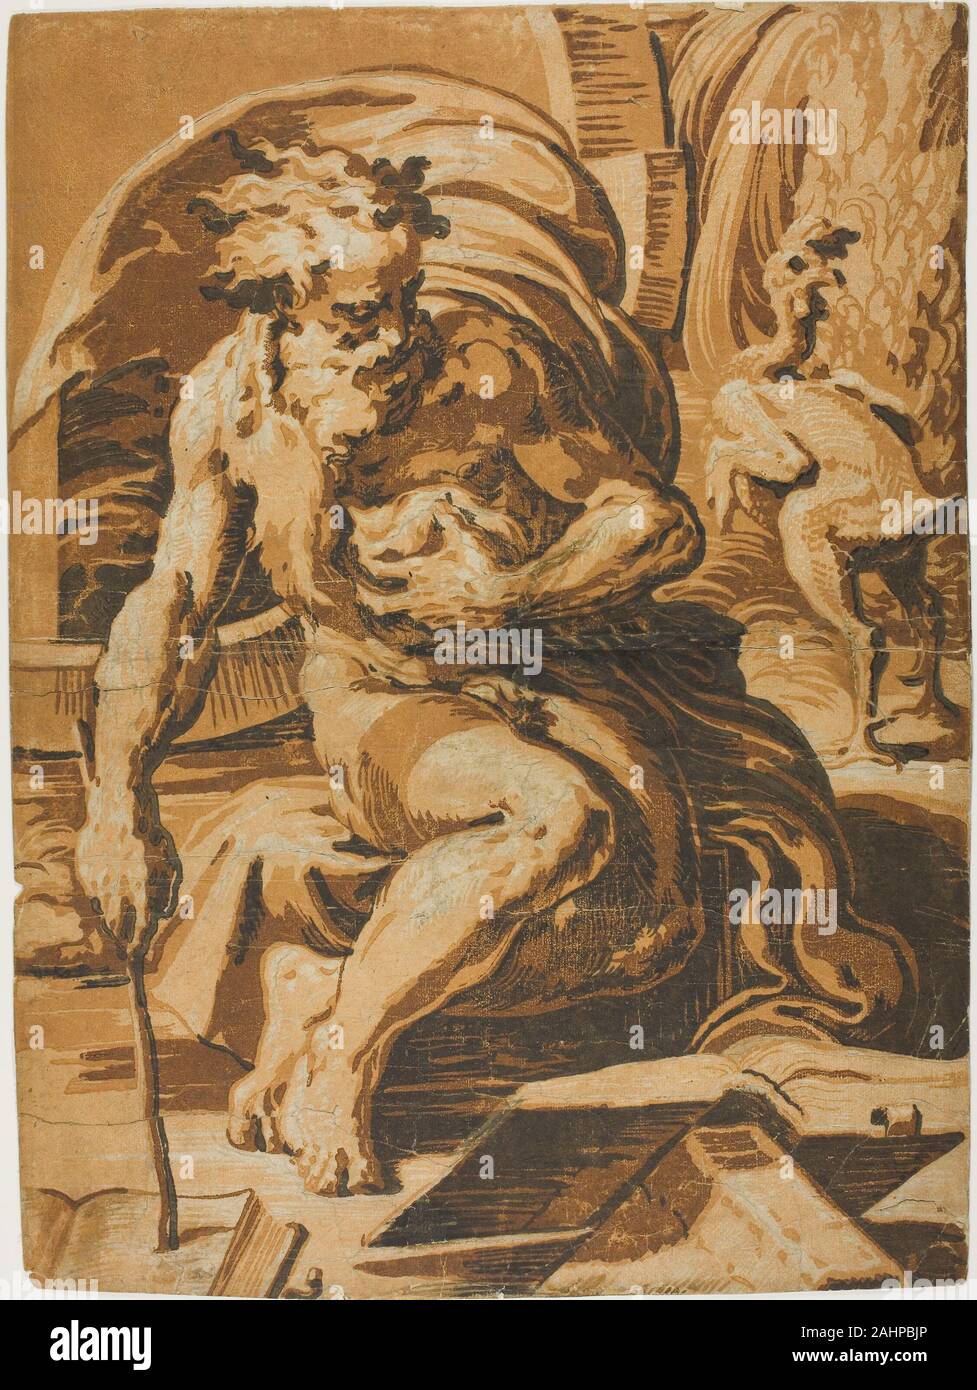 Ugo da Carpi. Diogenes. 1520–1530. Italy. Chiaroscuro woodcut from three blocks on ivory laid paper Renowned as one of the best prints of the sixteenth century, this masterpiece by the great woodcut artist not only reveals his absorption of Roman High Renaissance art but also paves the way for the dynamism of the Baroque. Diogenes, a fourth century B.C. Greek philosopher, chose the hardship of dwelling in a wooden tub, seen in the background. The plucked rooster reflects his ridicule of his contemporary, Plato, who defined man as a featherless biped. Stock Photo